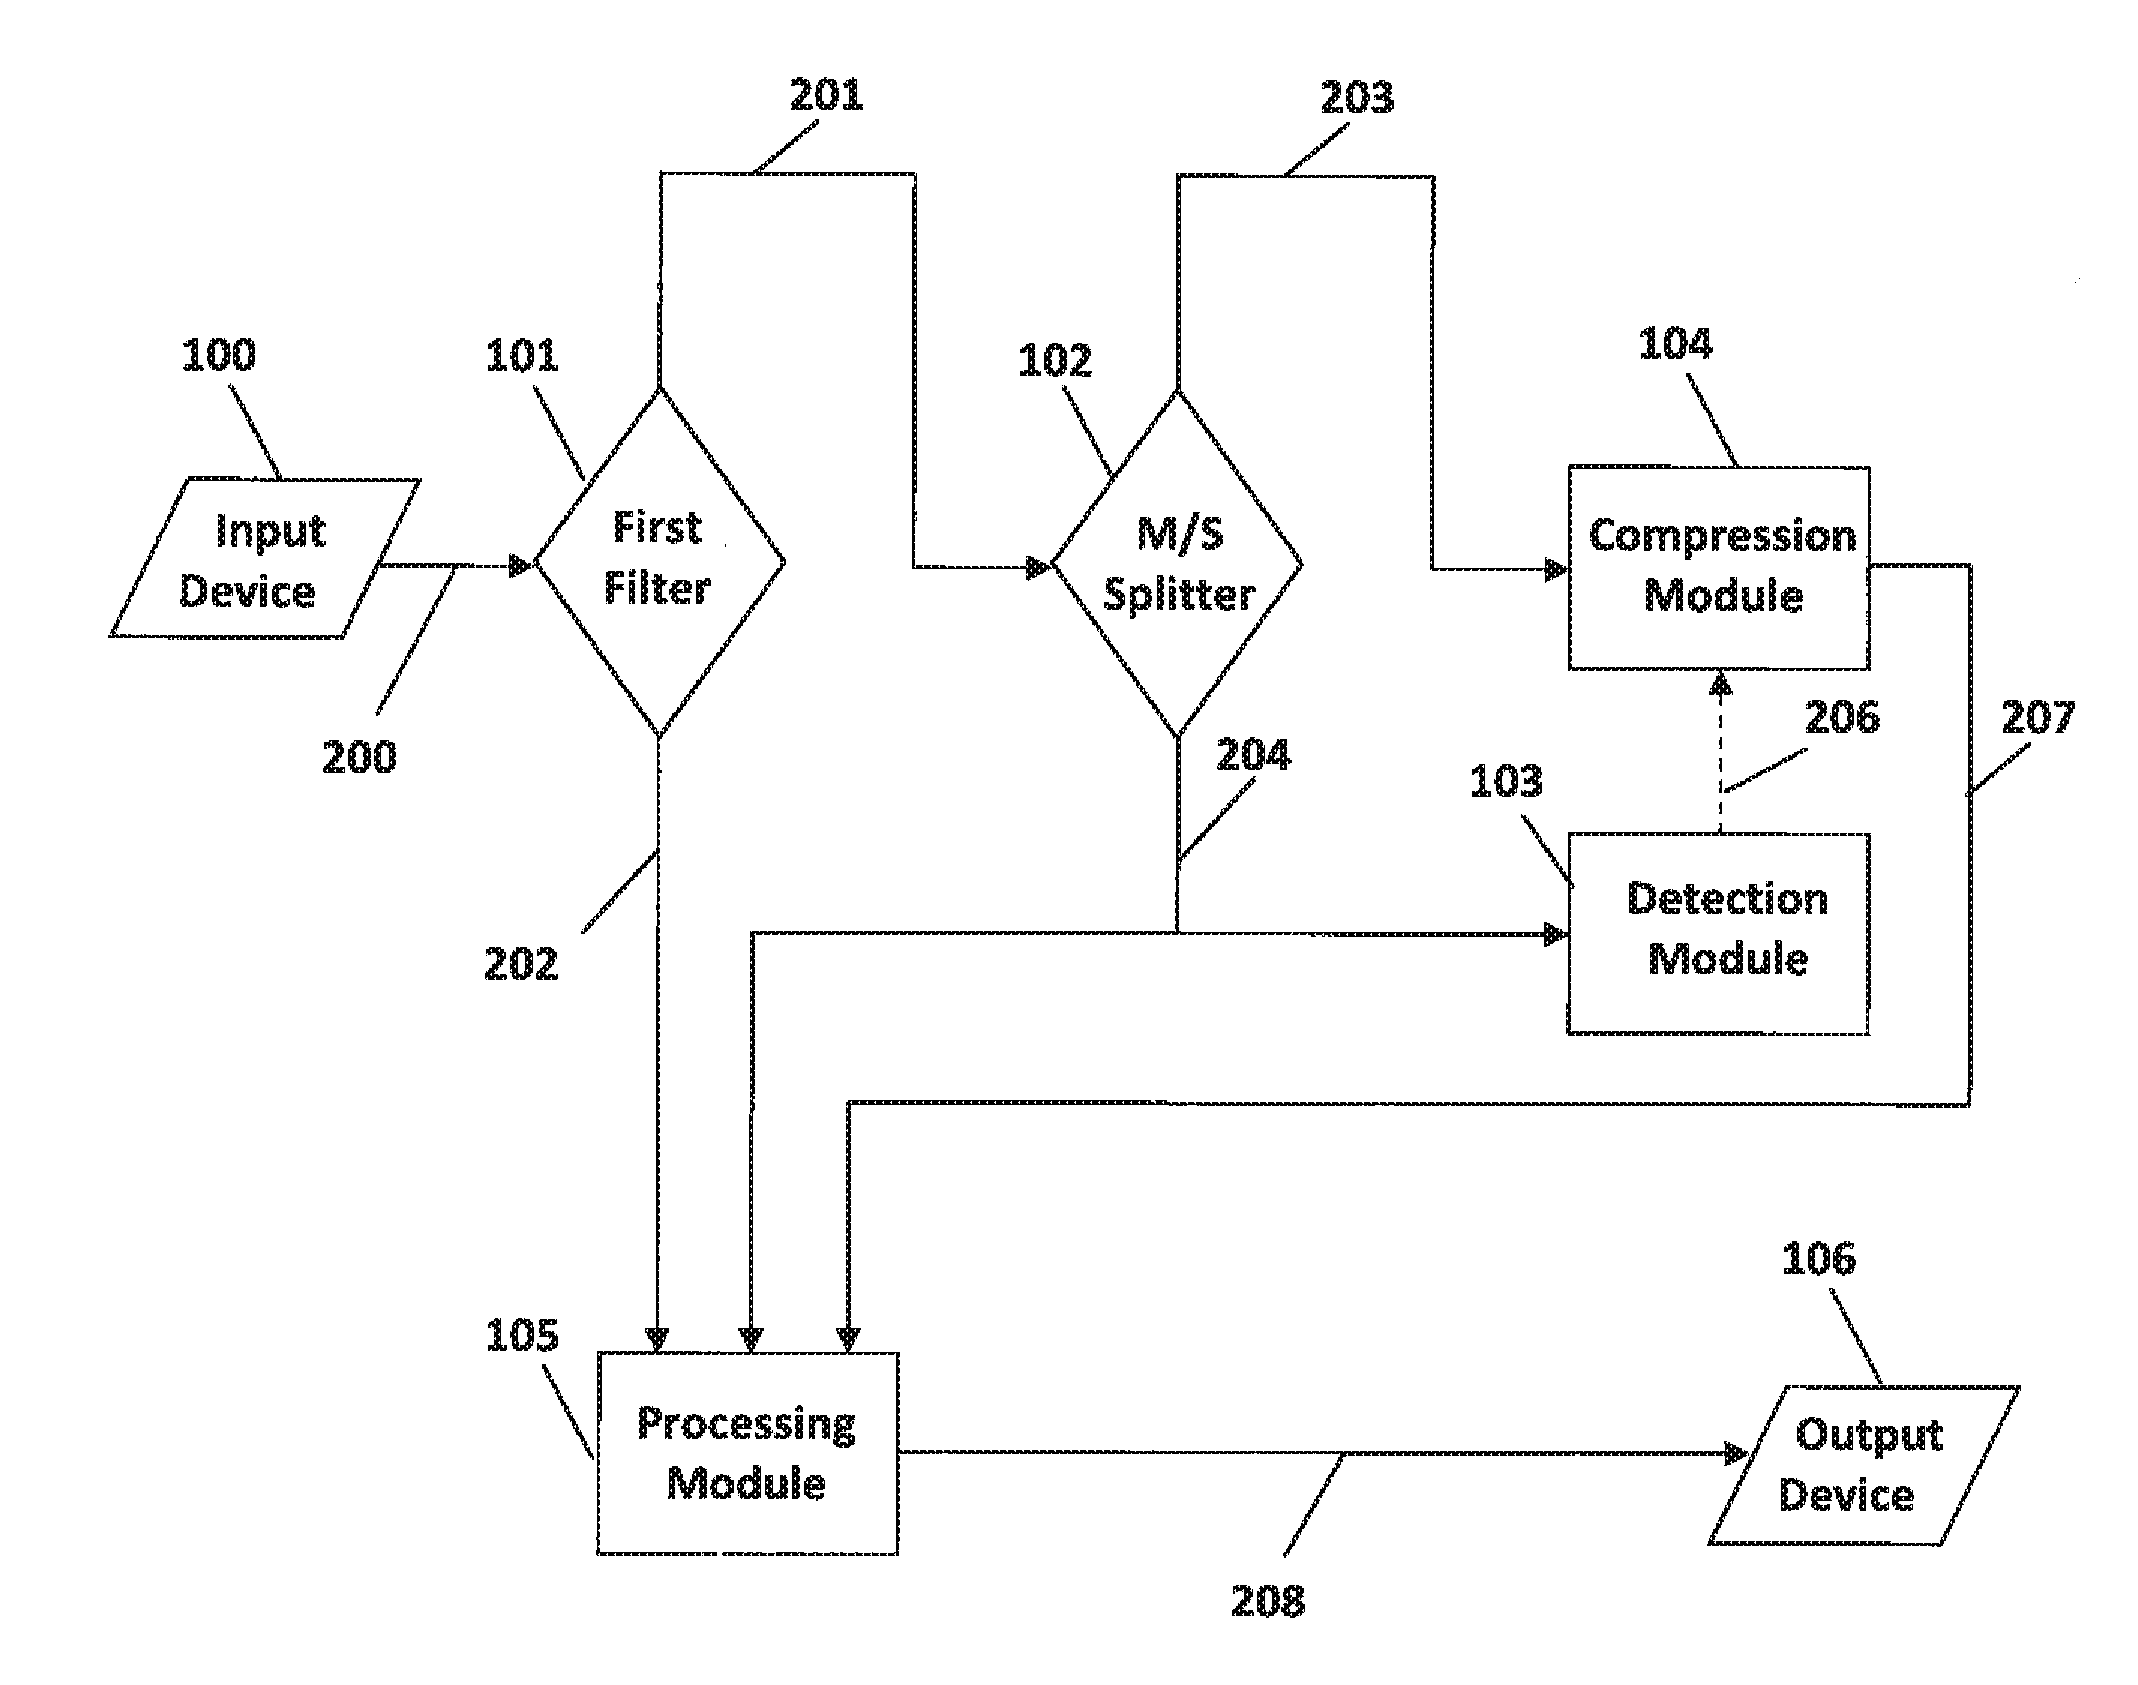 System and method for stereo field enhancement in two-channel audio systems